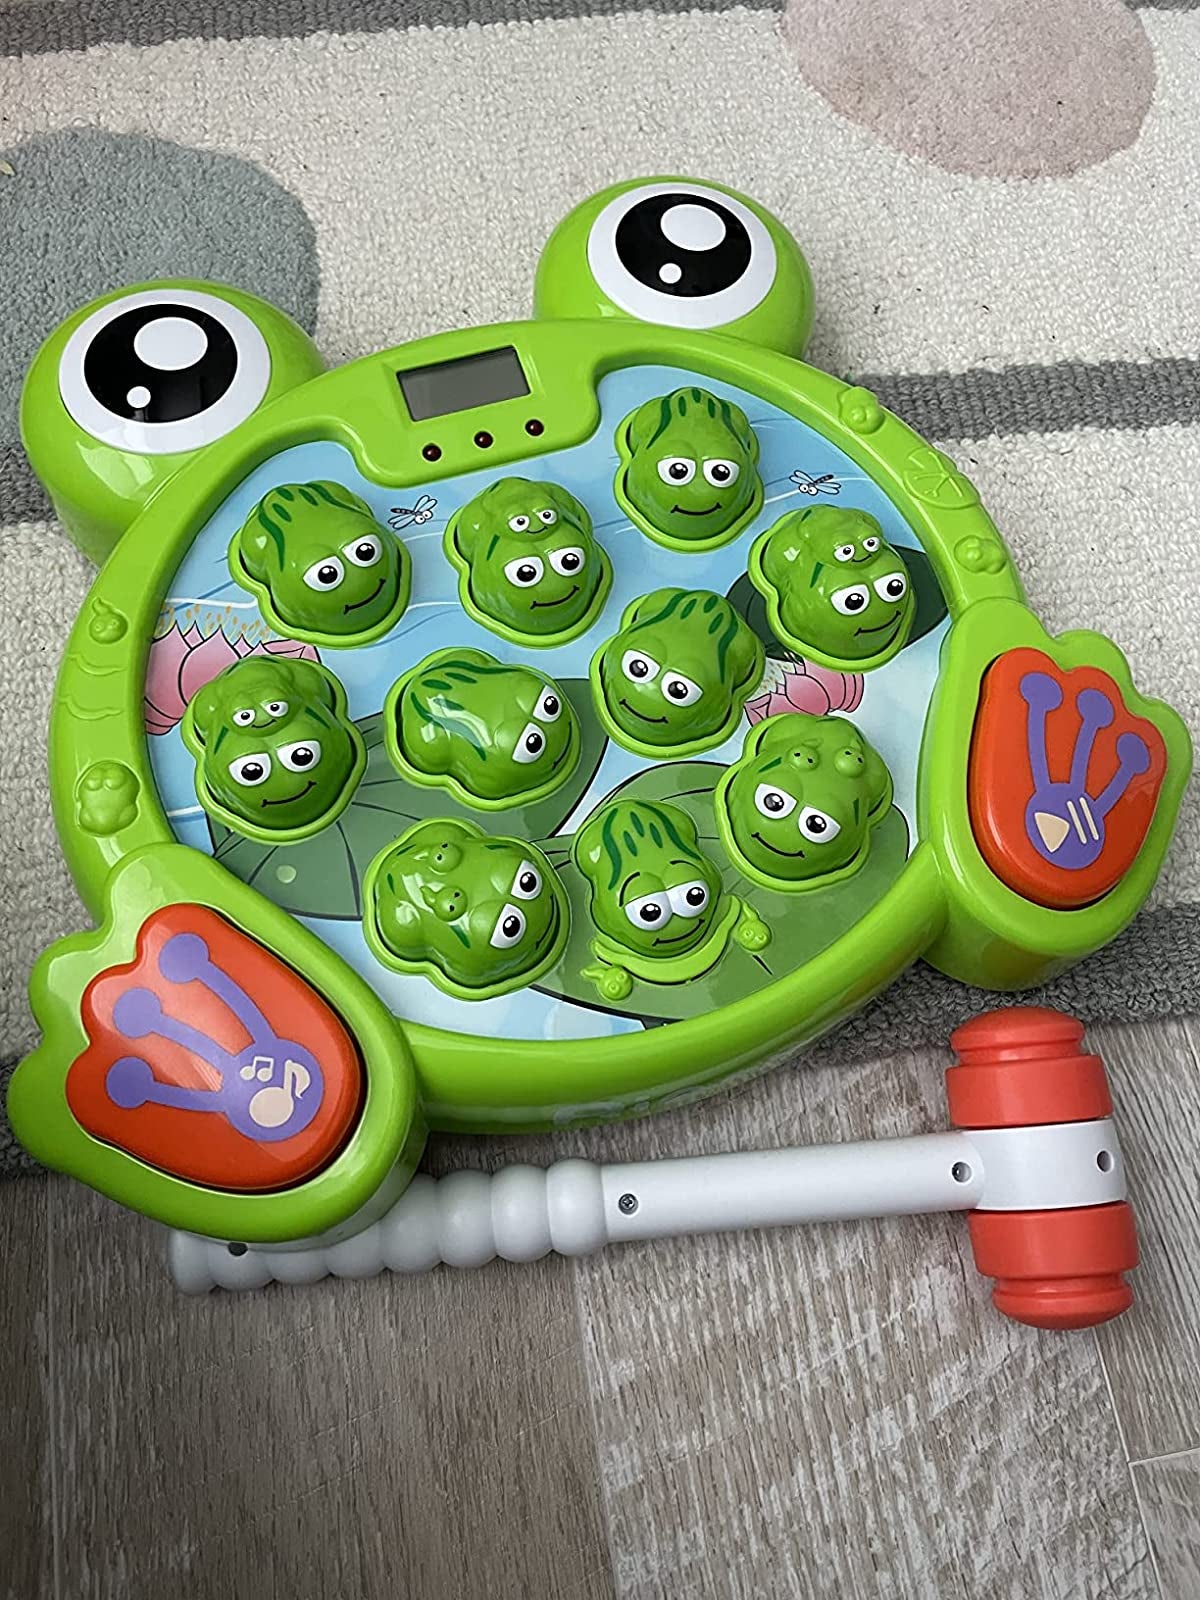 Reviewer image of green frog-shaped game with plastic hammer 